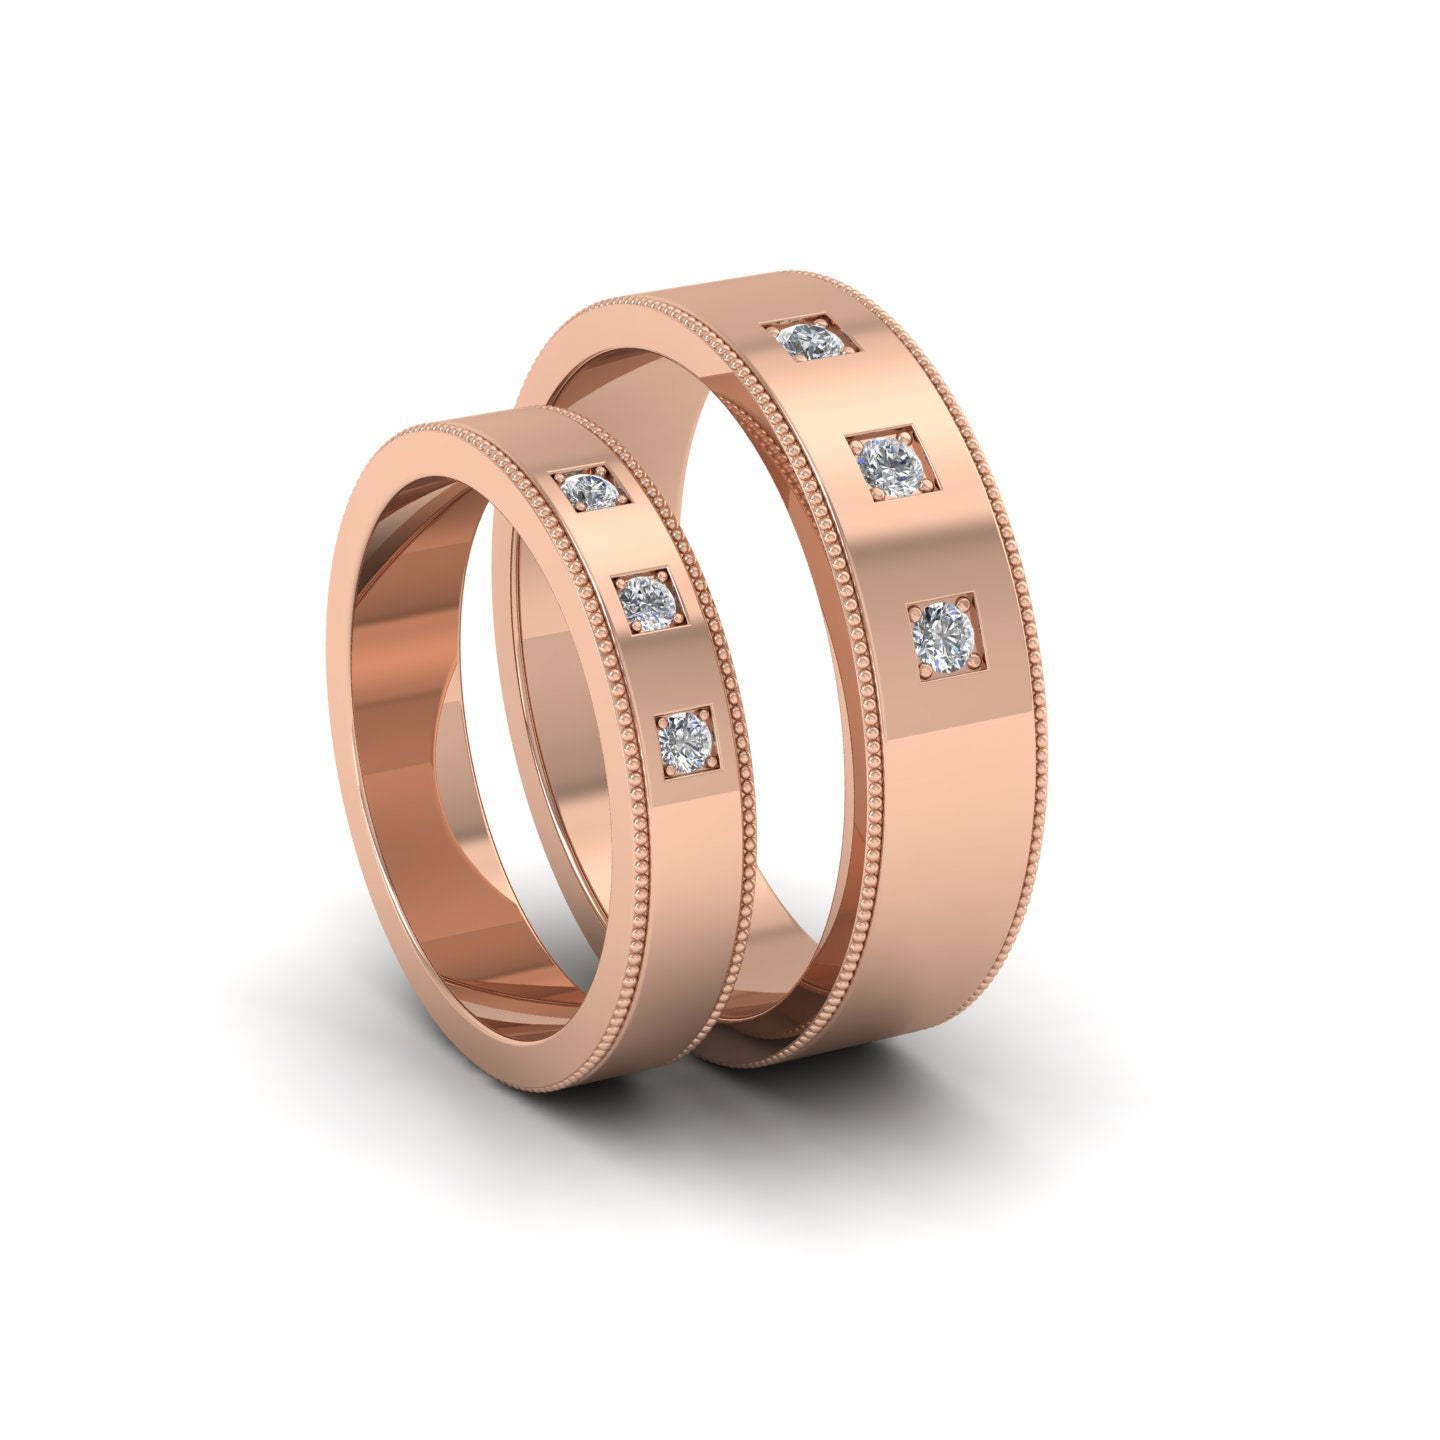 Three Diamonds With Square Setting 18ct Rose Gold 4mm Wedding Ring With Millgrain Edge